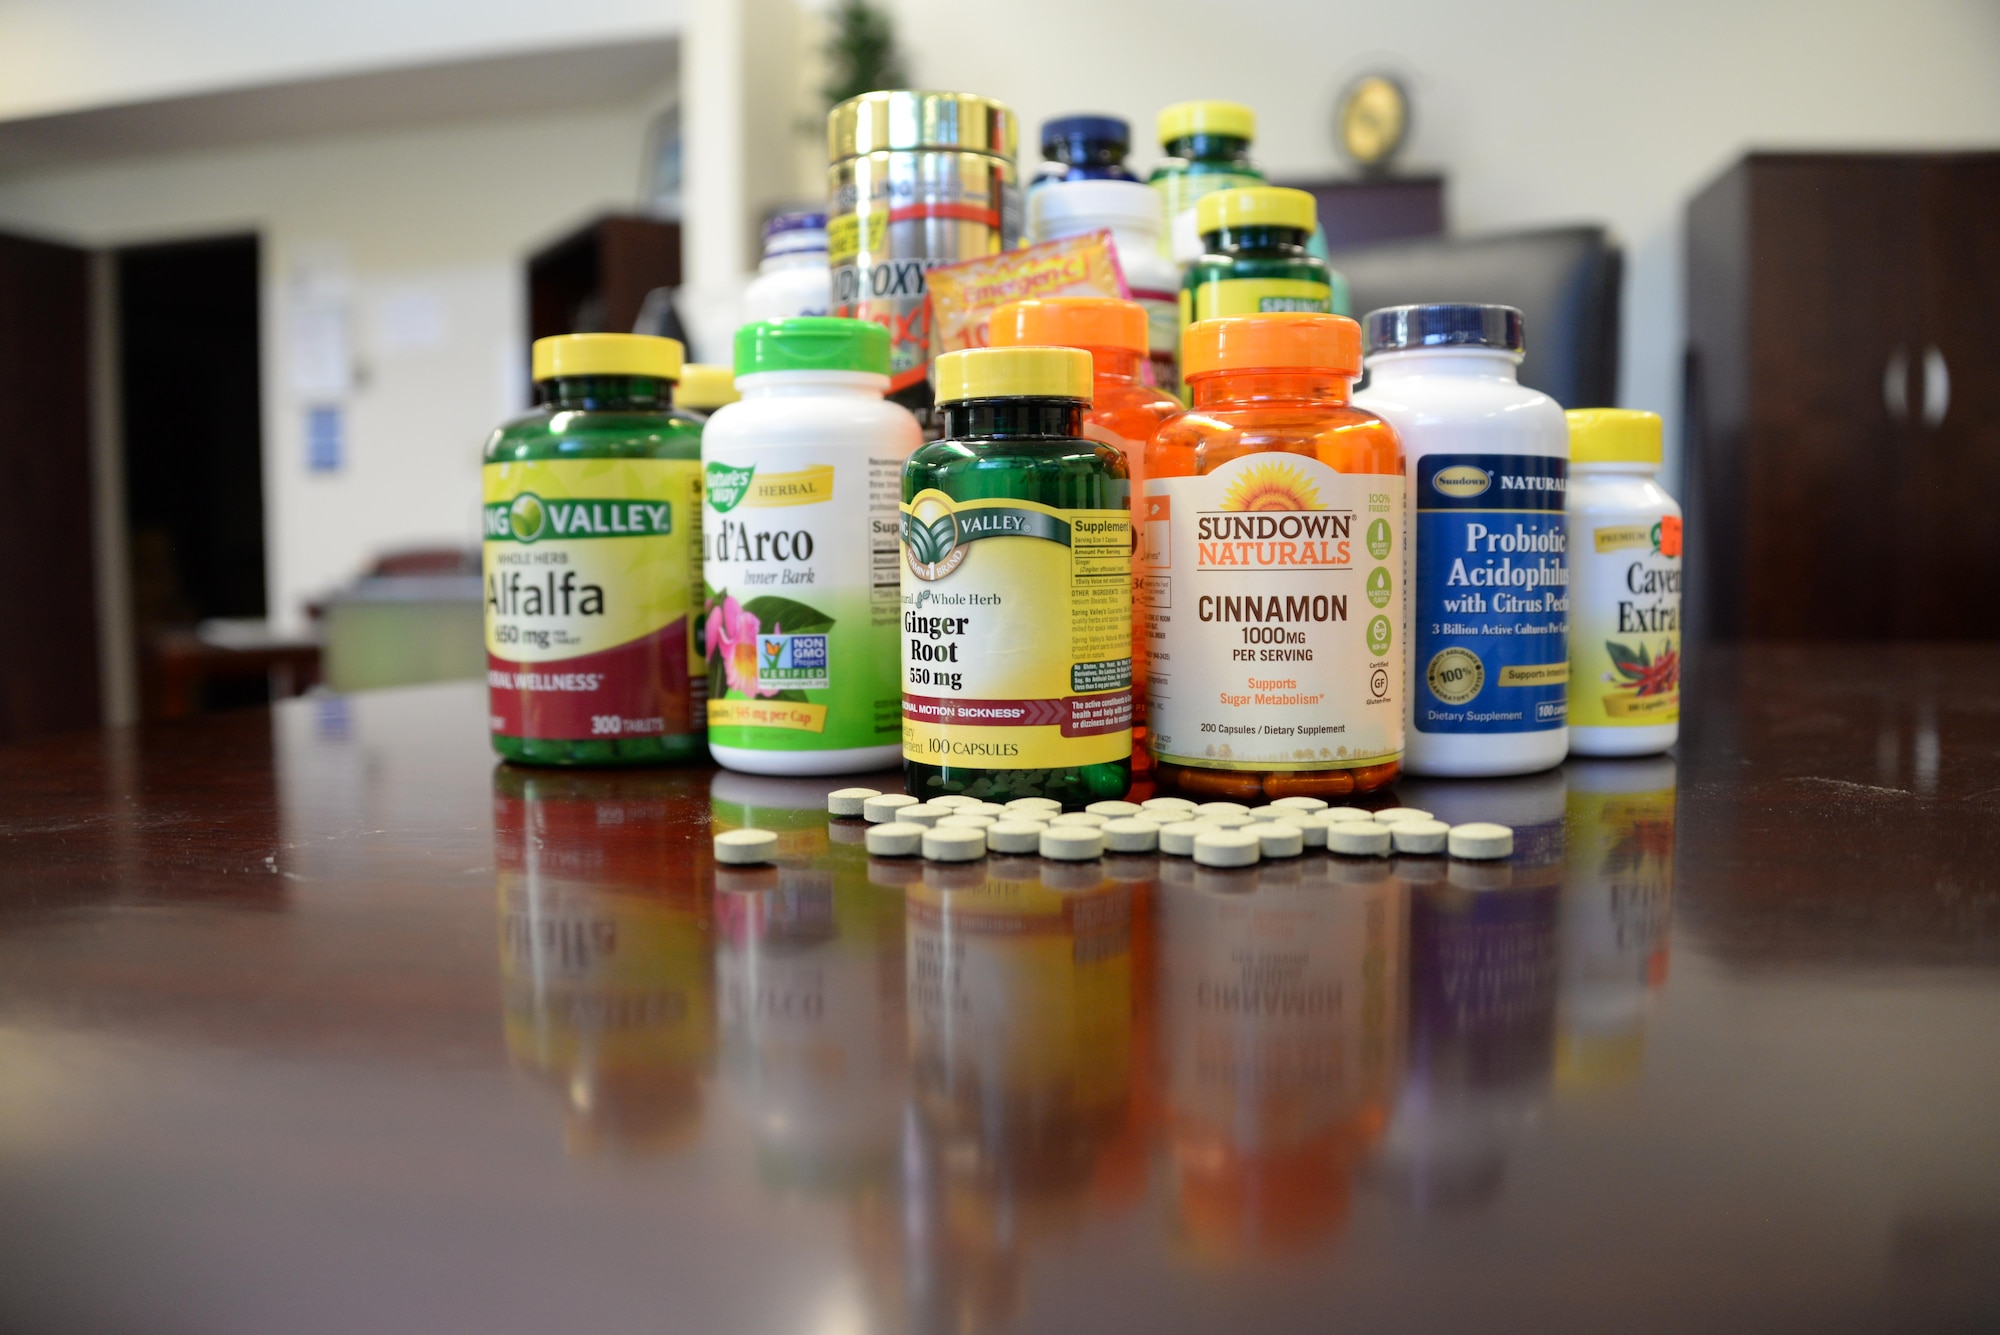 A 2015 research study found that 60 to 70 percent of active-duty members and 44 to 53 percent of Department of Defense civilians use at least one dietary supplement per week. The study also found that people who used one to two supplements per week were 1.5 times more likely to report abnormal heartbeats. People using three to four supplements were three times more likely to report abnormal heartbeats. (U.S. Air Force photo / Senior Airman Amber Carter)